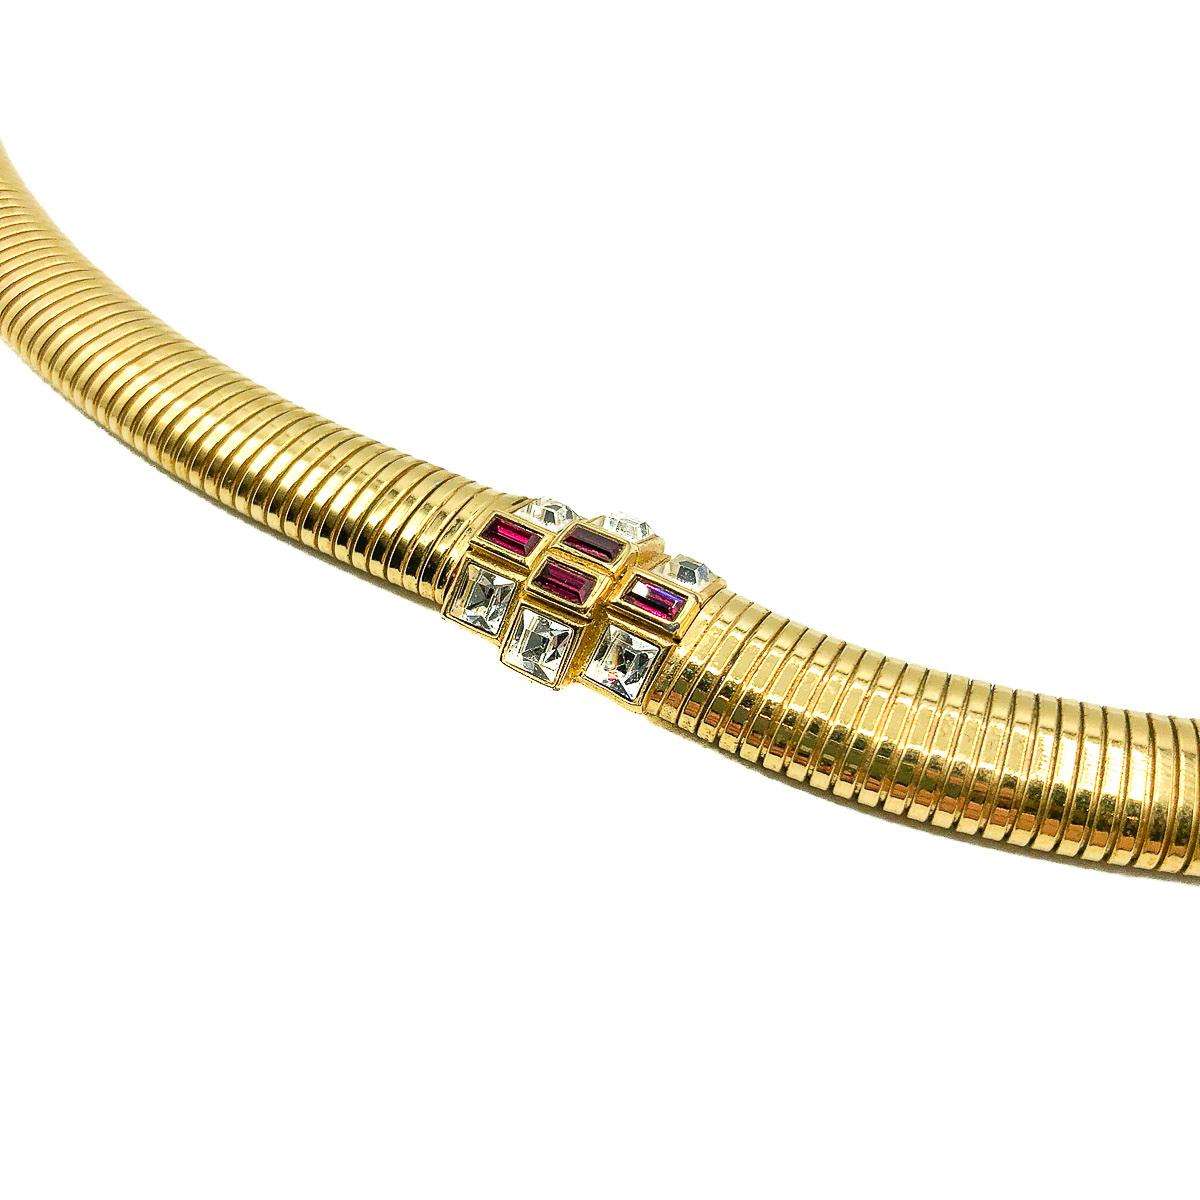 A totally timeless and oh so glamorous Vintage Nina Ricci Ruby Collar. Crafted in high quality gold plated metal and set with fancy cut crystal stones emulating ruby and diamond. Omega style collar. In very good vintage condition. 39cms. Signed. A